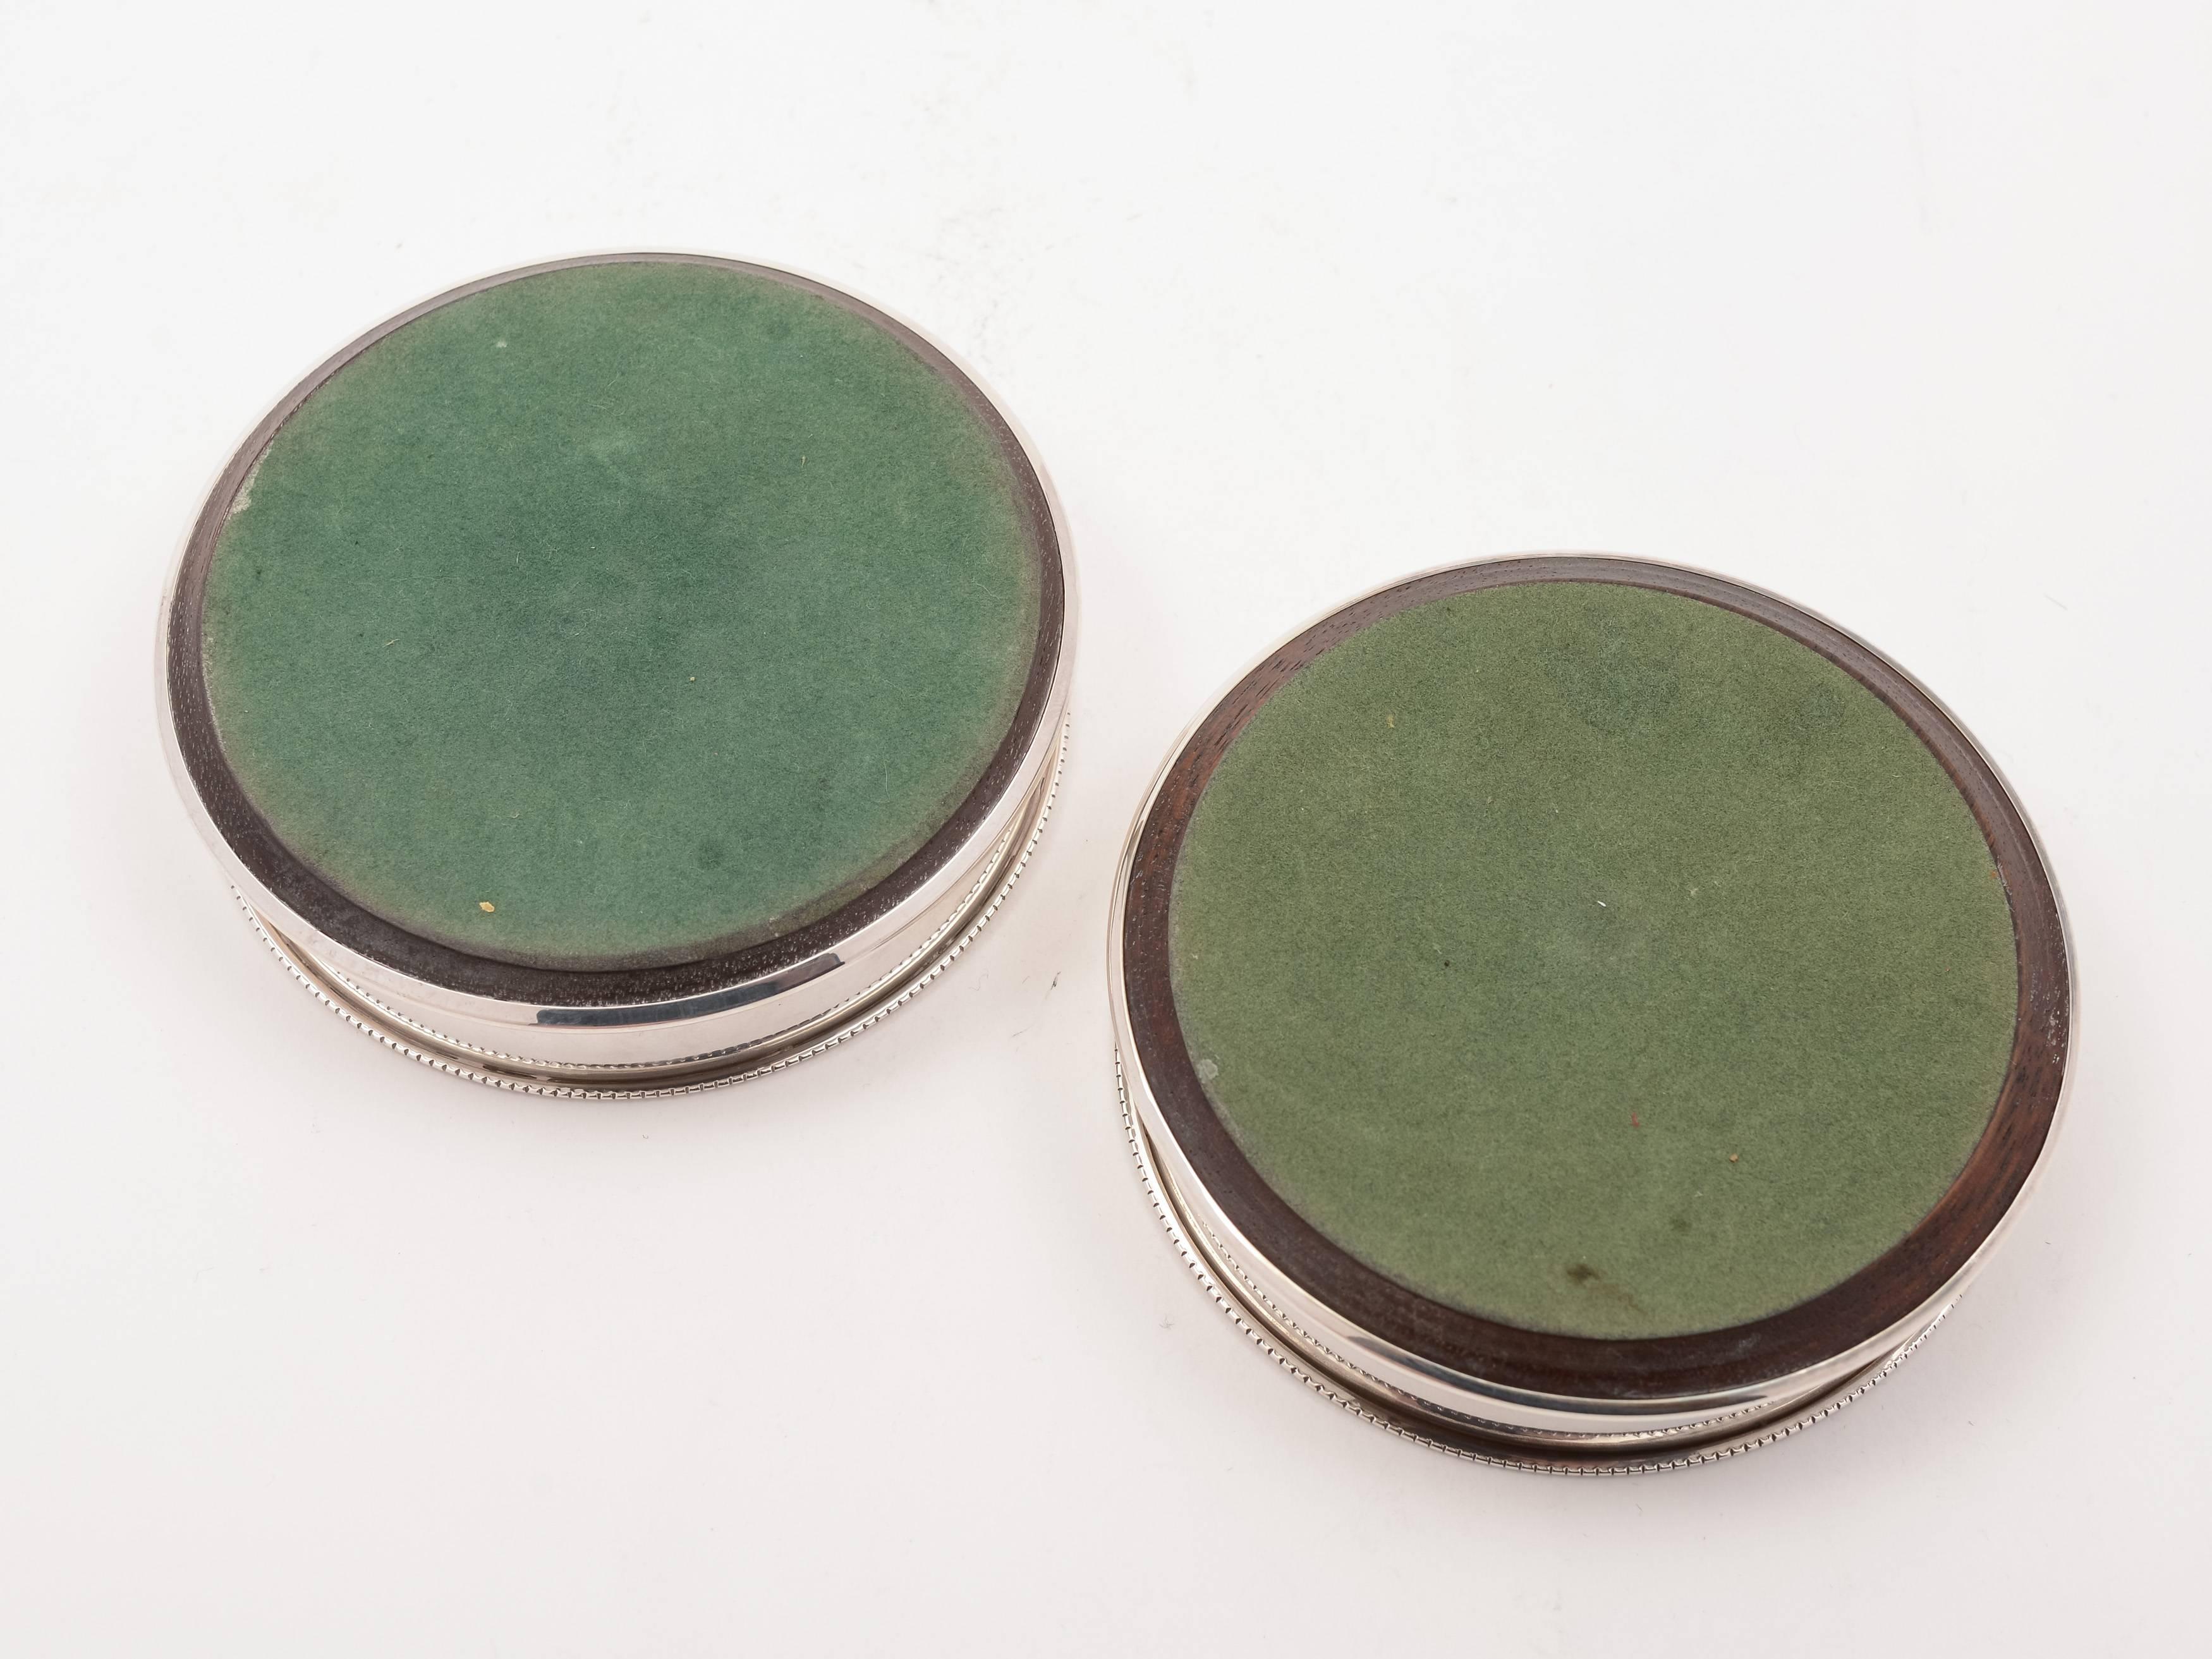 A lovely pair of English vintage silver wine coasters with turned hardwood bases and plain silver sides. Hallmarked Birmingham 1992 and marked 'P H V & Co' for maker P H Vogel & Co. 

Measurements:
Height 3/4